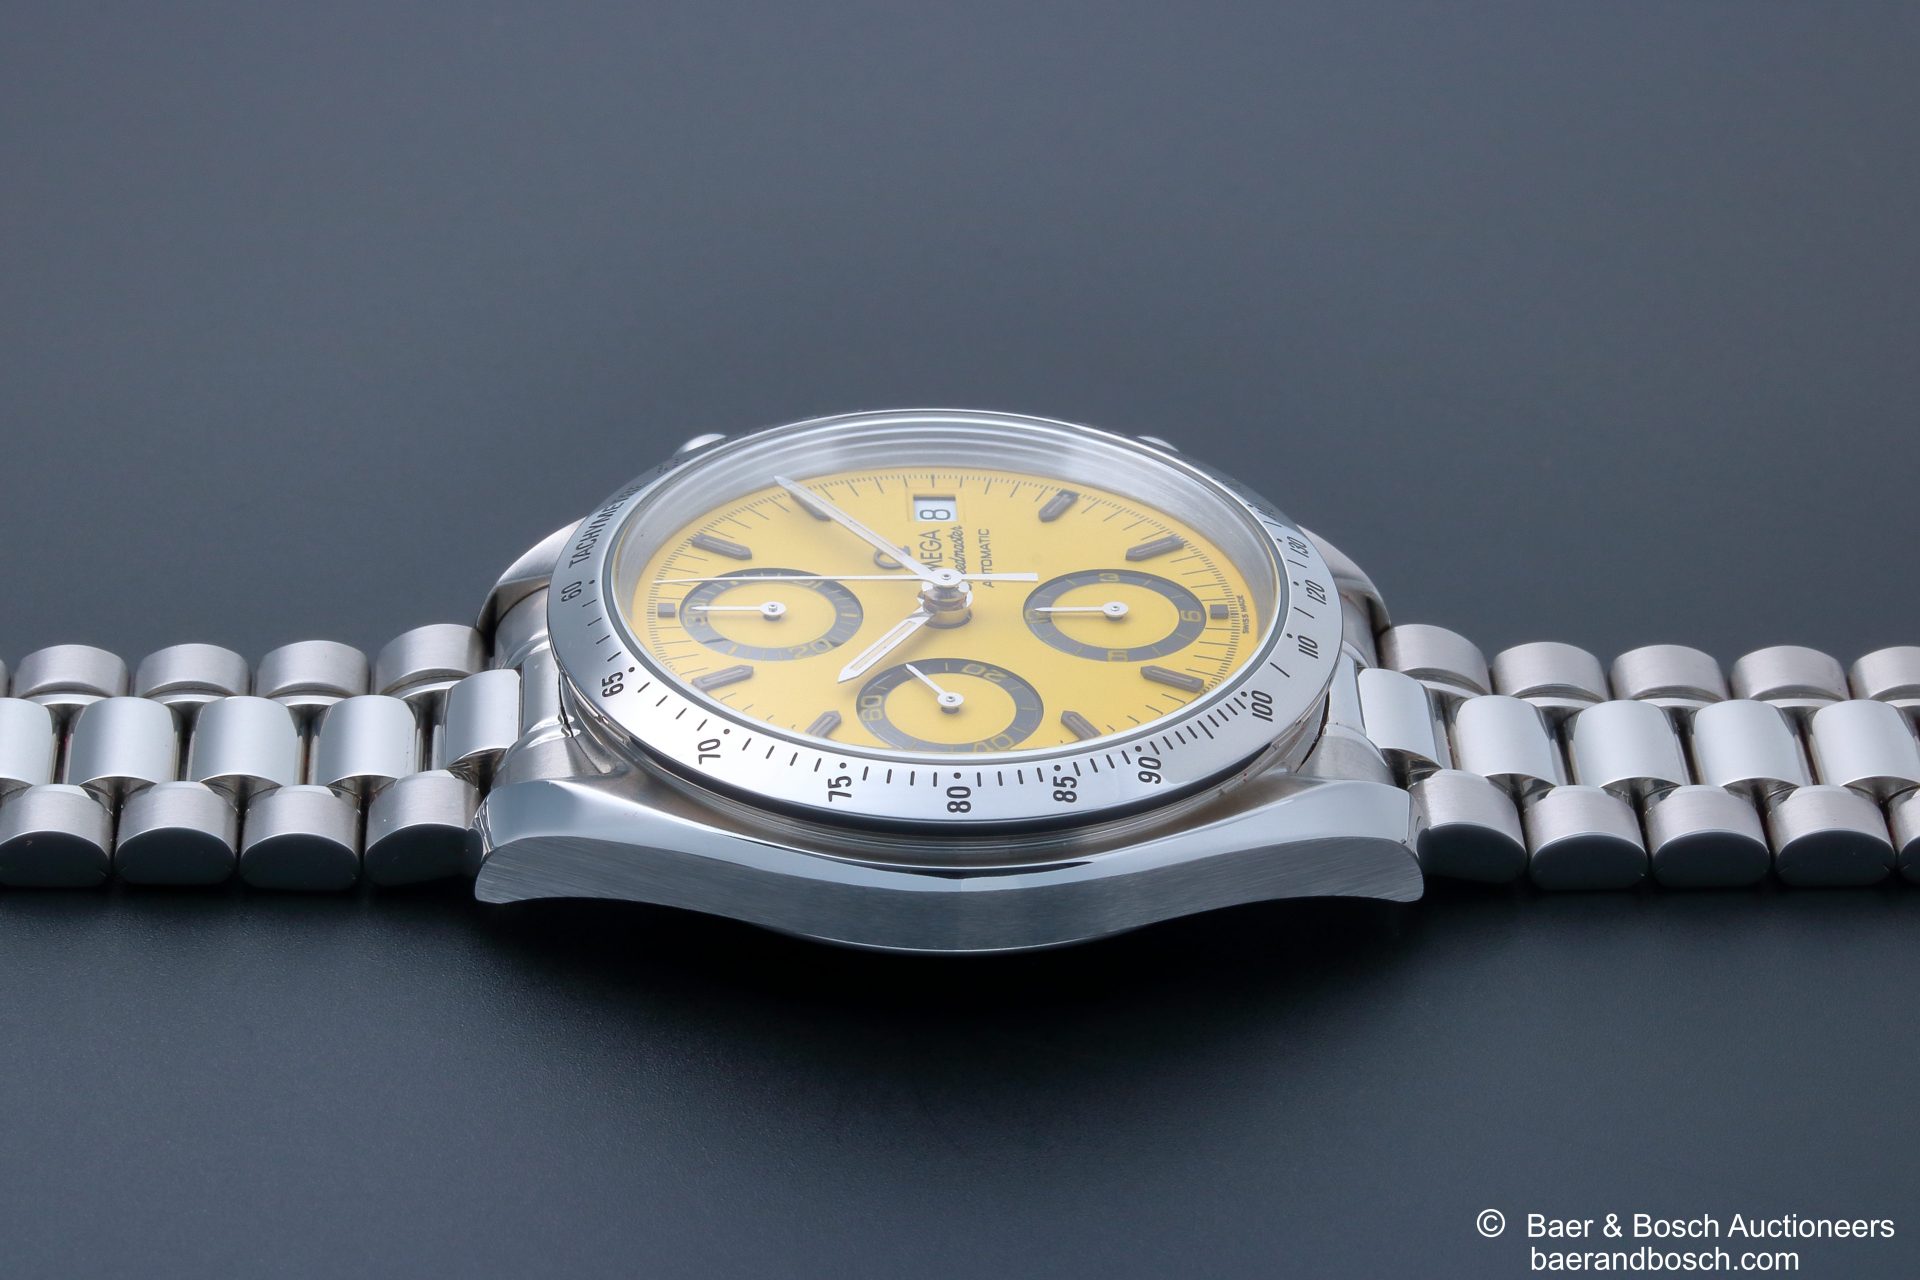 Omega Speedmaster Yellow Dial Watch 3511.12 - Baer & Bosch Collecting Times